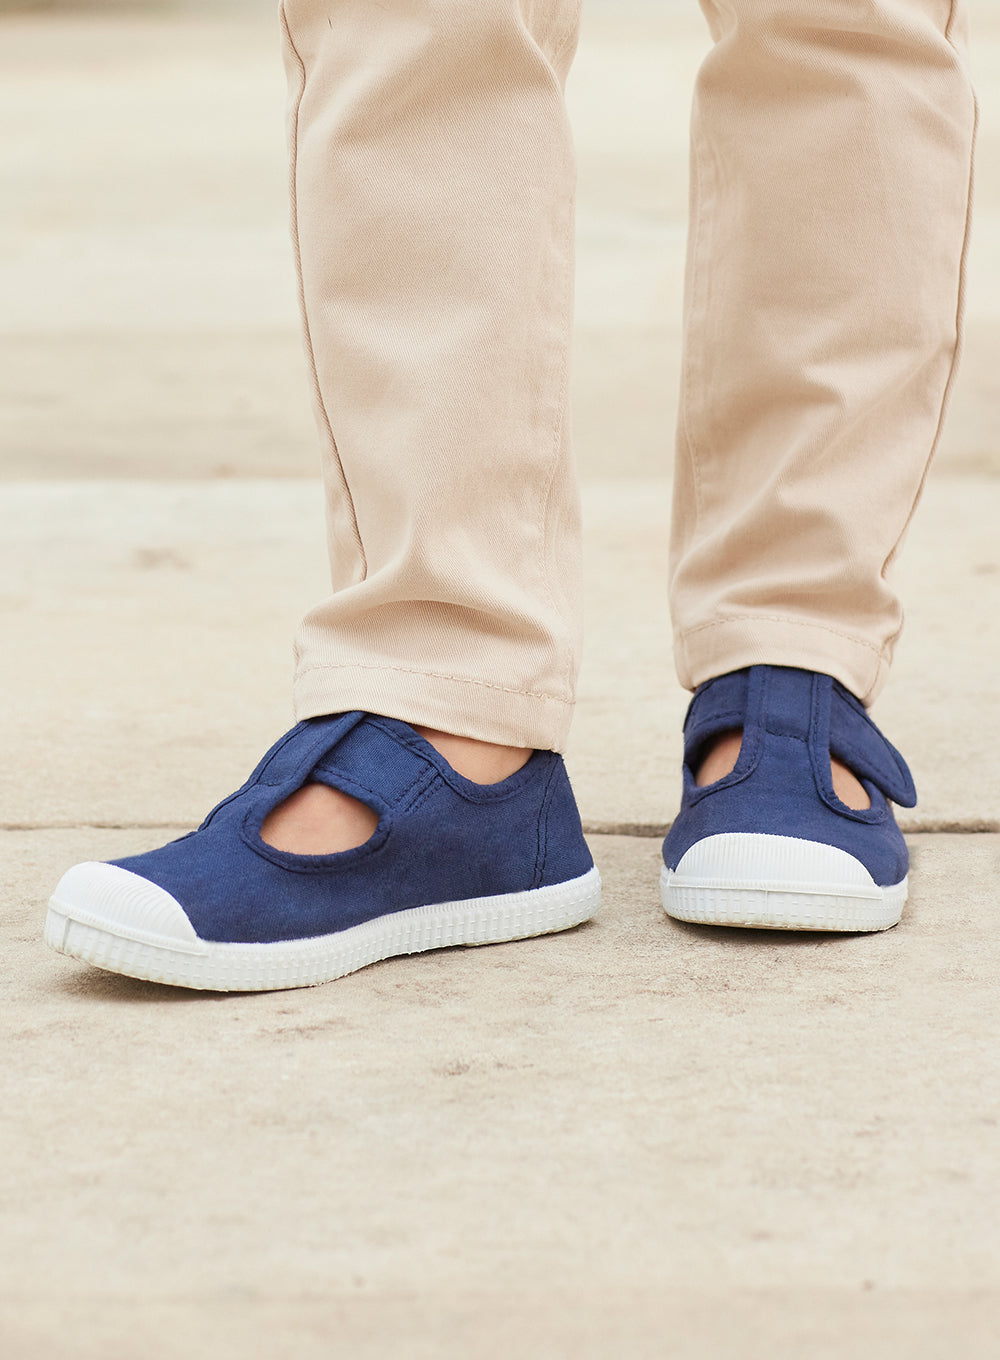 Hampton Canvas Champ Shoes in Navy